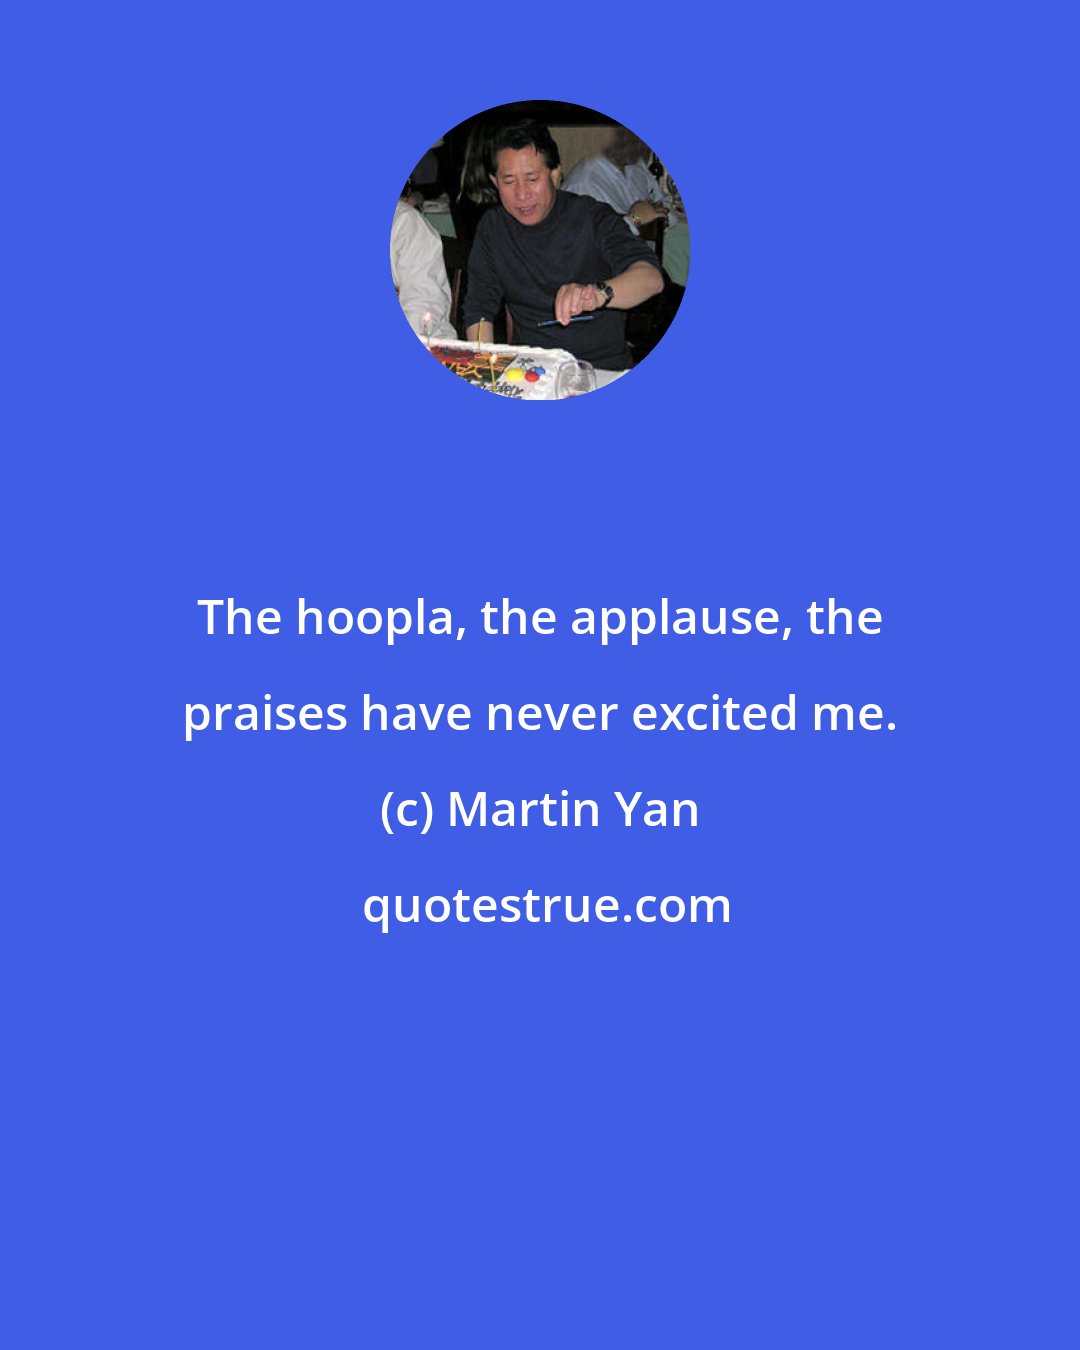 Martin Yan: The hoopla, the applause, the praises have never excited me.